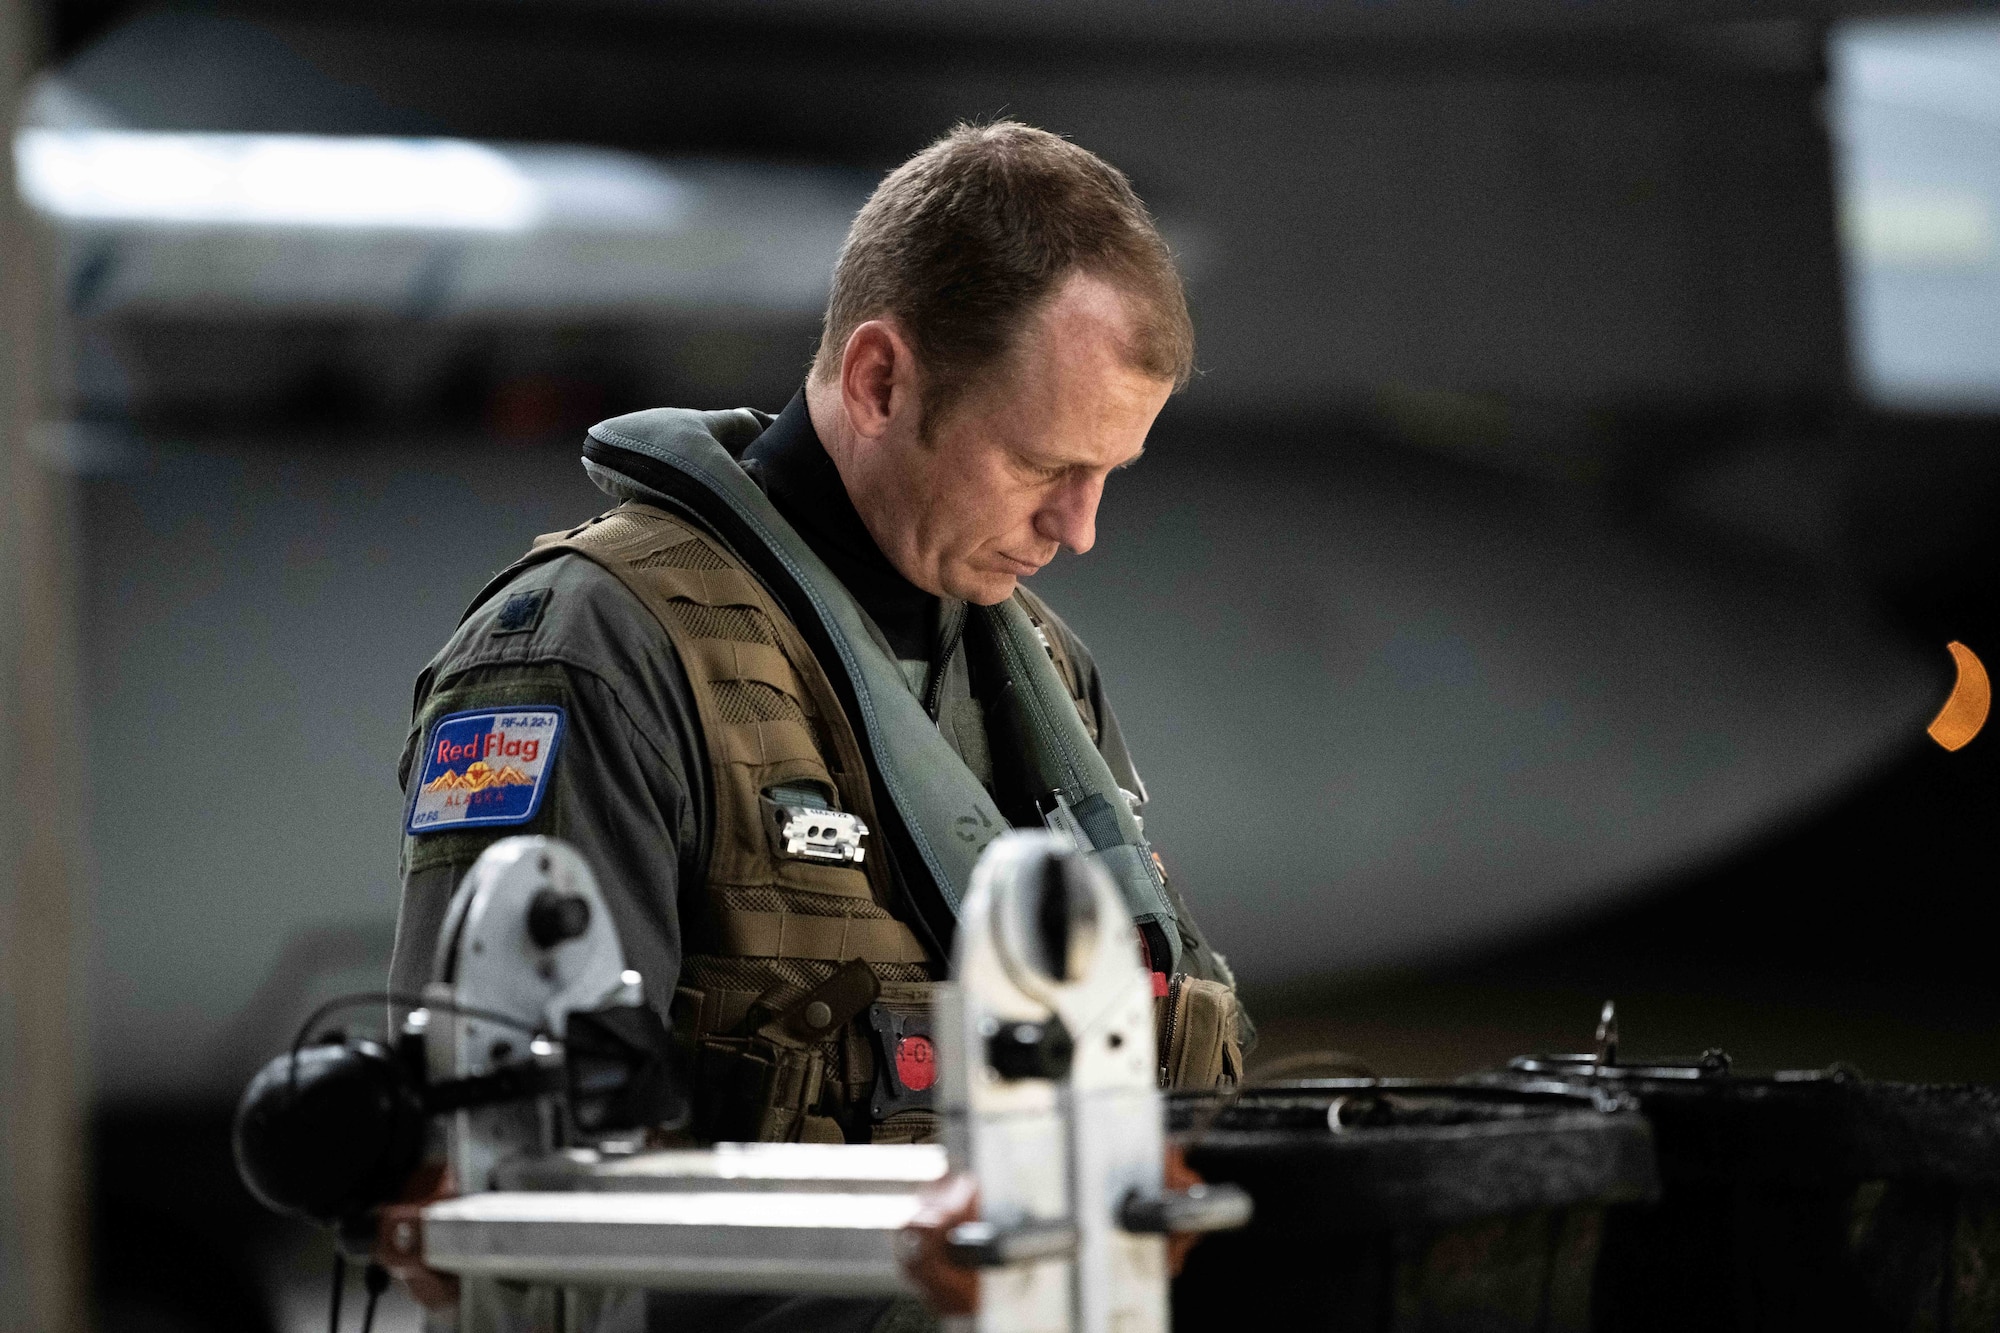 A U.S. Air Force pilot assigned to the 67th Fighter Squadron reviews flight plans for Red Flag-Alaska at Kadena Air Base, Japan, April 15, 2022. Red Flag-Alaska is a Pacific Air Forces-directed field training exercise for U.S. and international forces flown under simulated air combat conditions primarily out of Eielson Air Force Base and Joint Base Elmendorf-Richardson, Alaska. (U.S. Air Force photo by Airman 1st Class Sebastian Romawac)